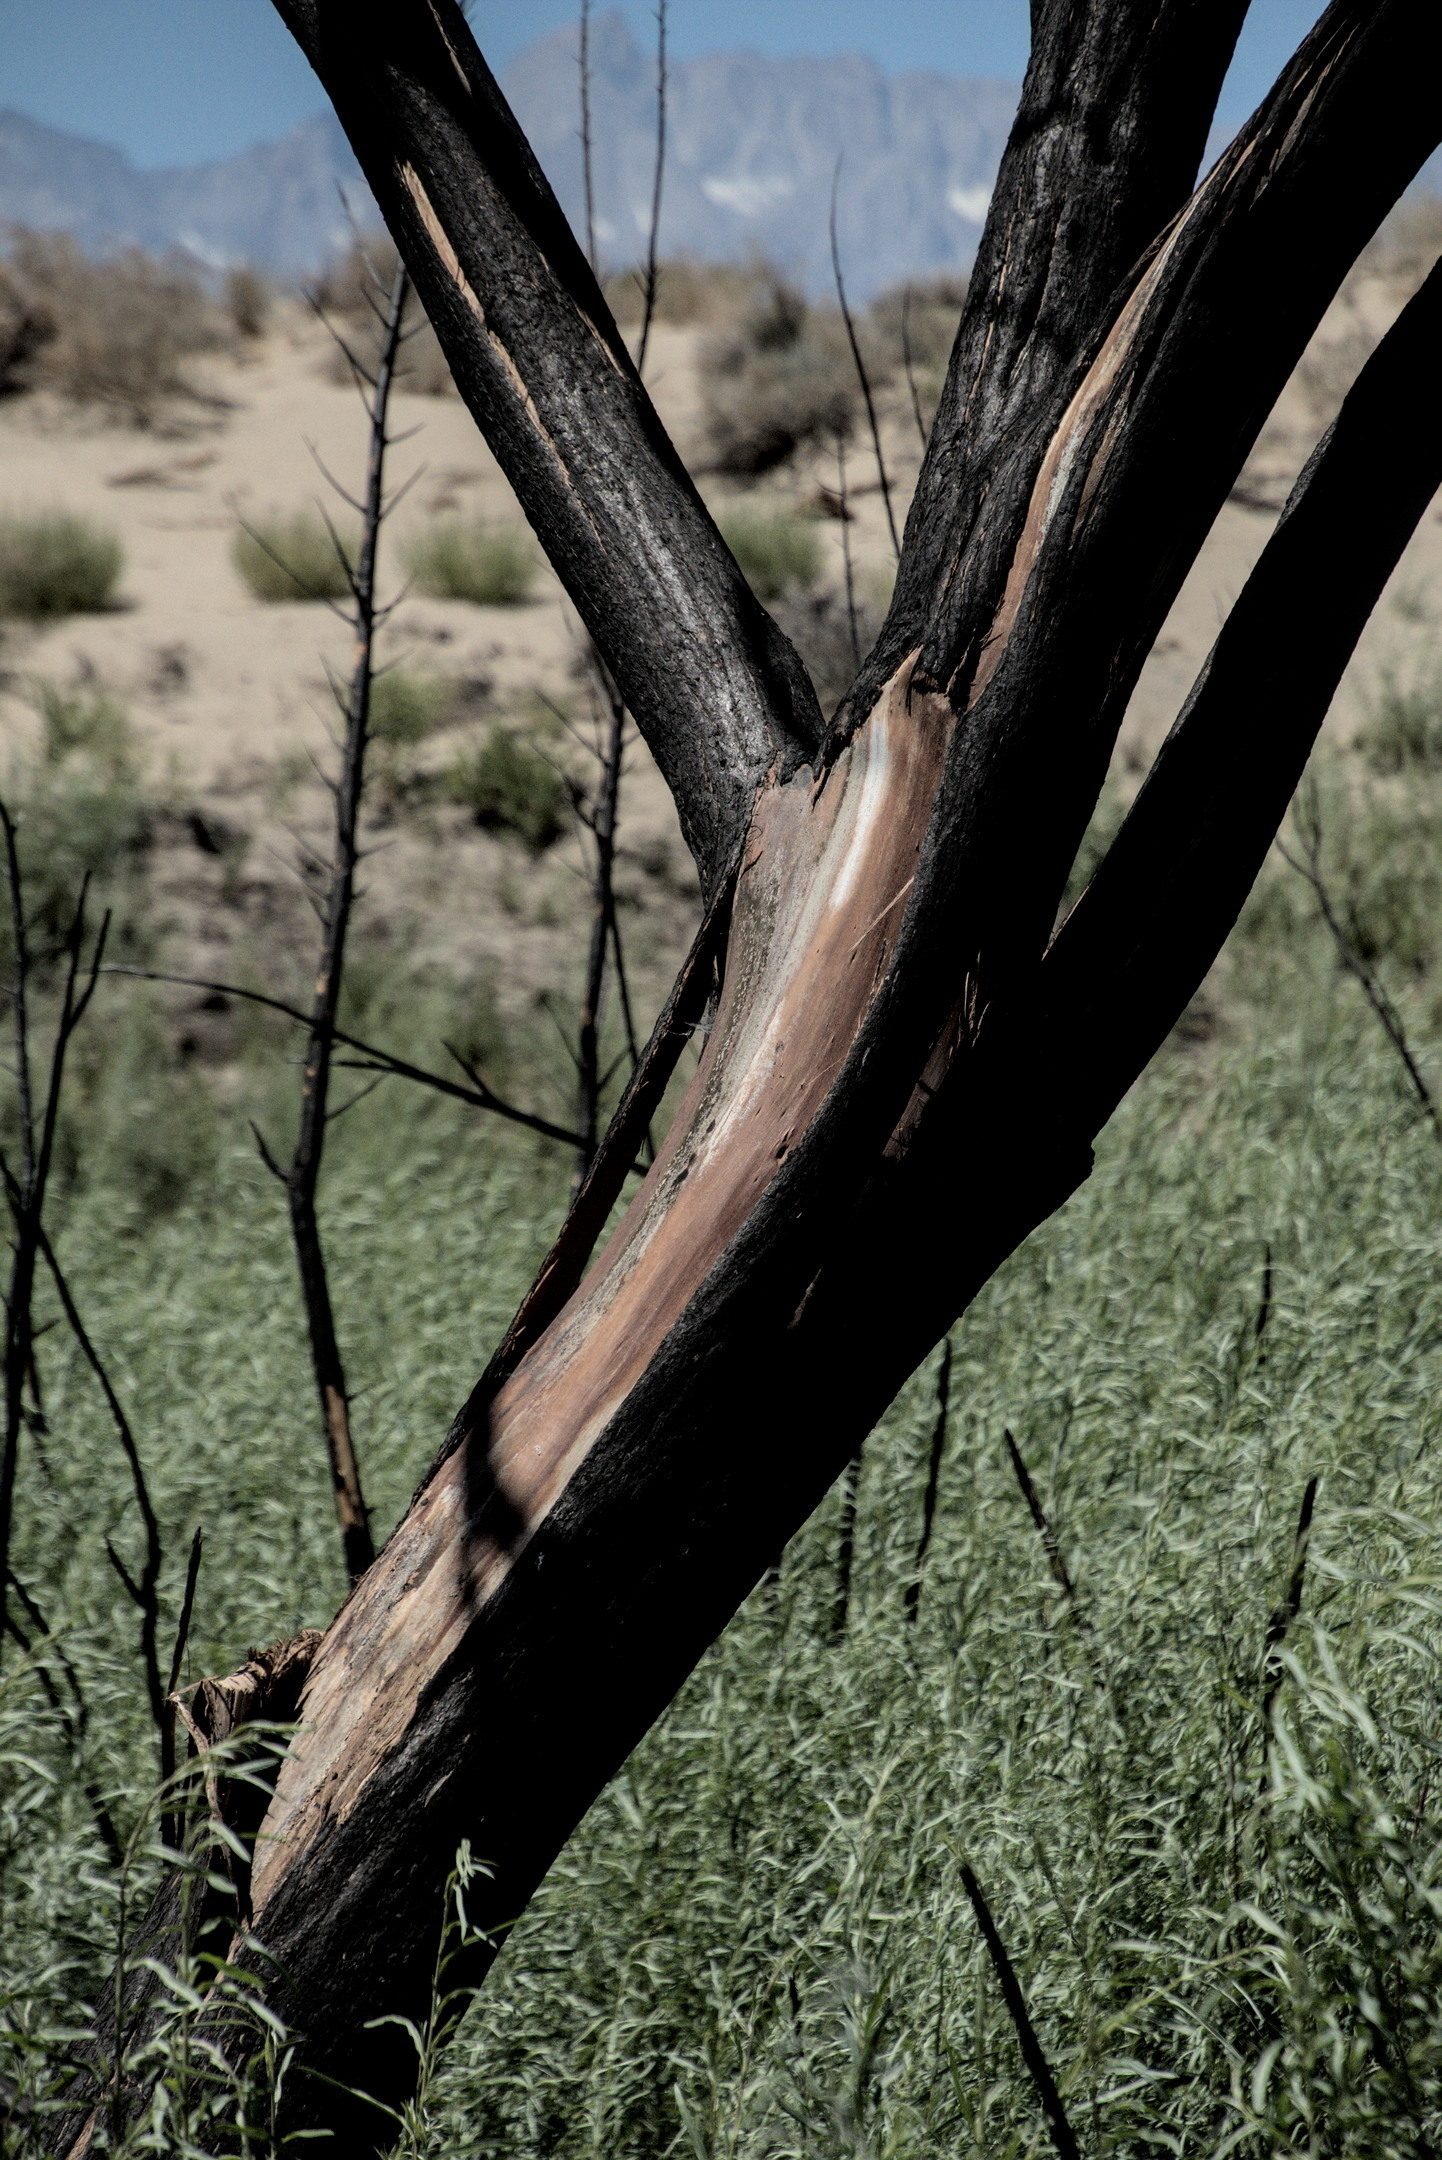 Burned tree trunk.  Without the foliage, we see a graceful leaning geometry.